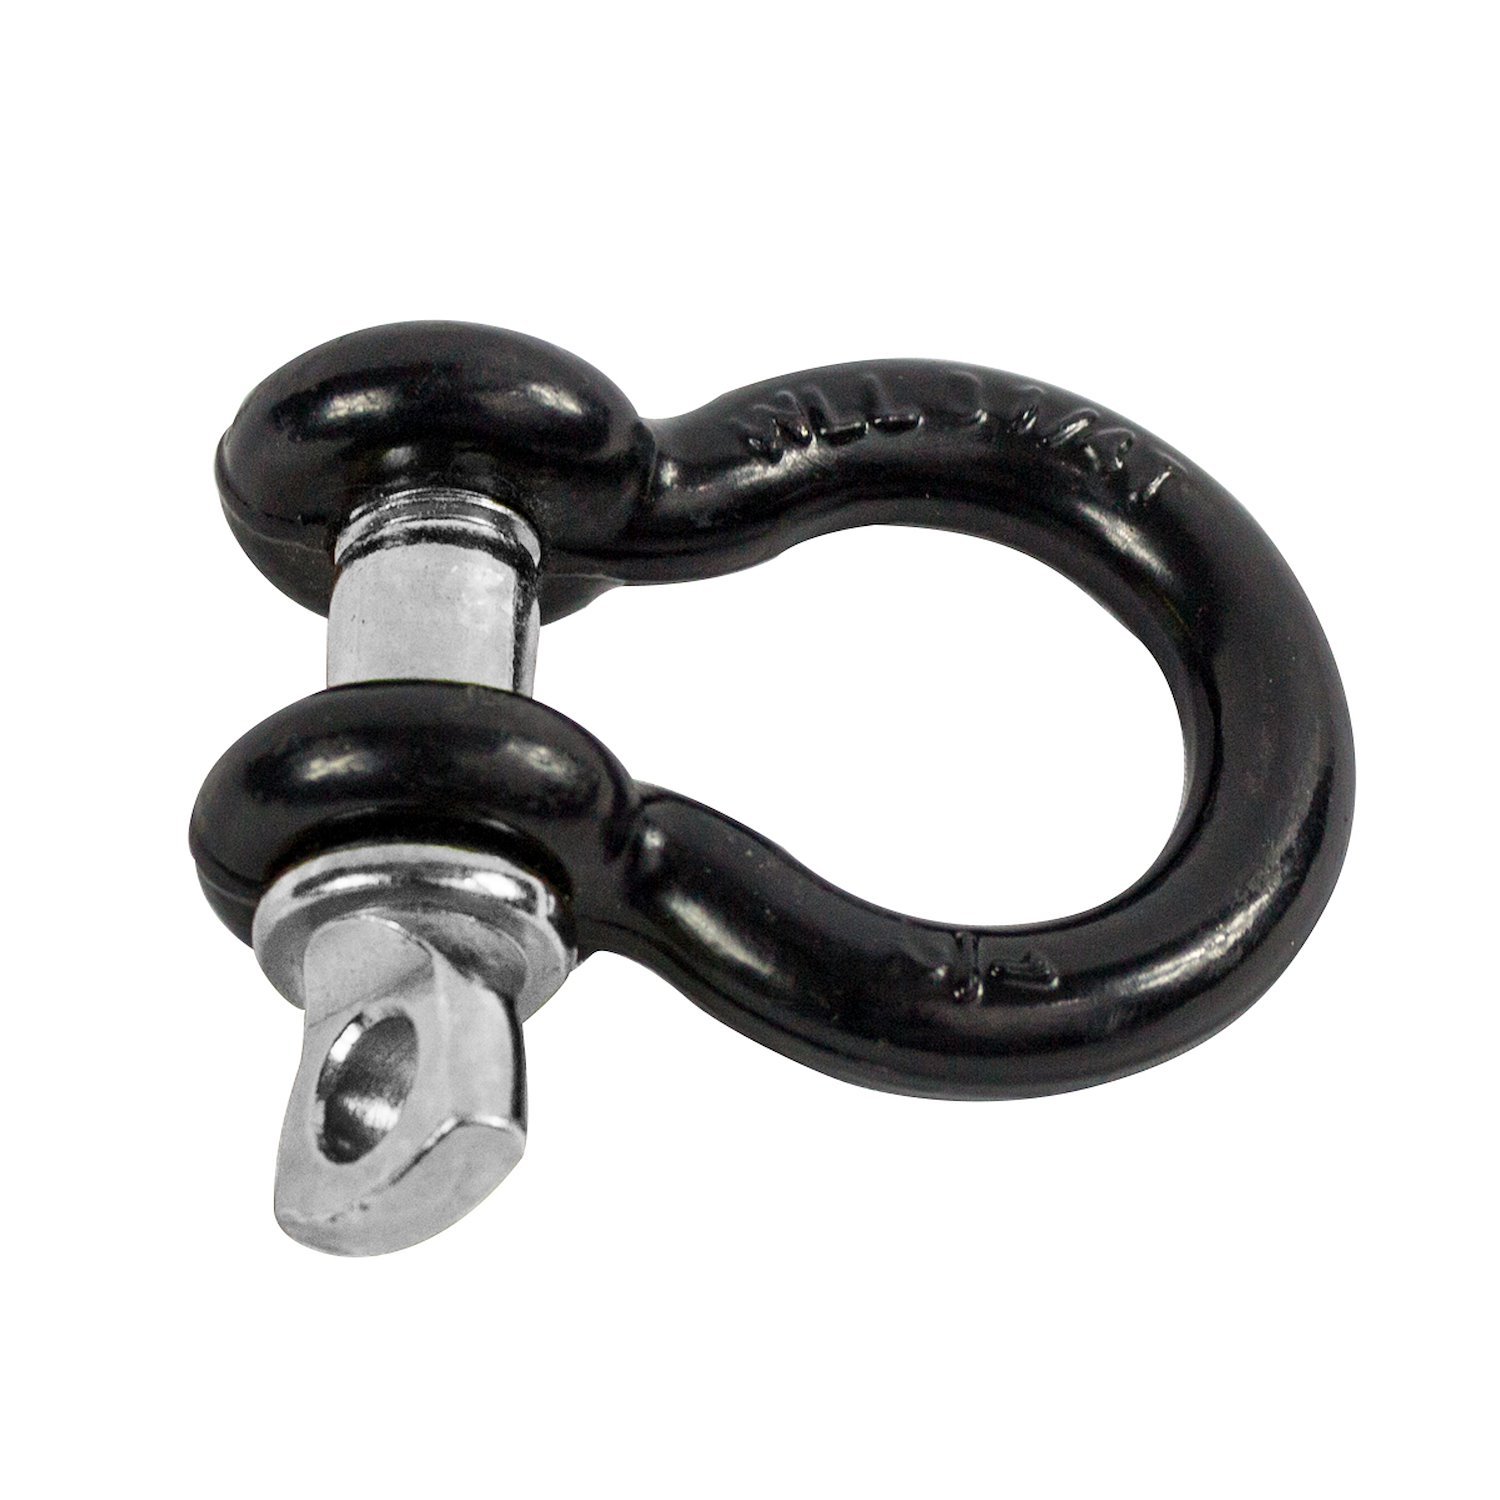 SMALLSHACKLE 5/8 in. Channel Shackles